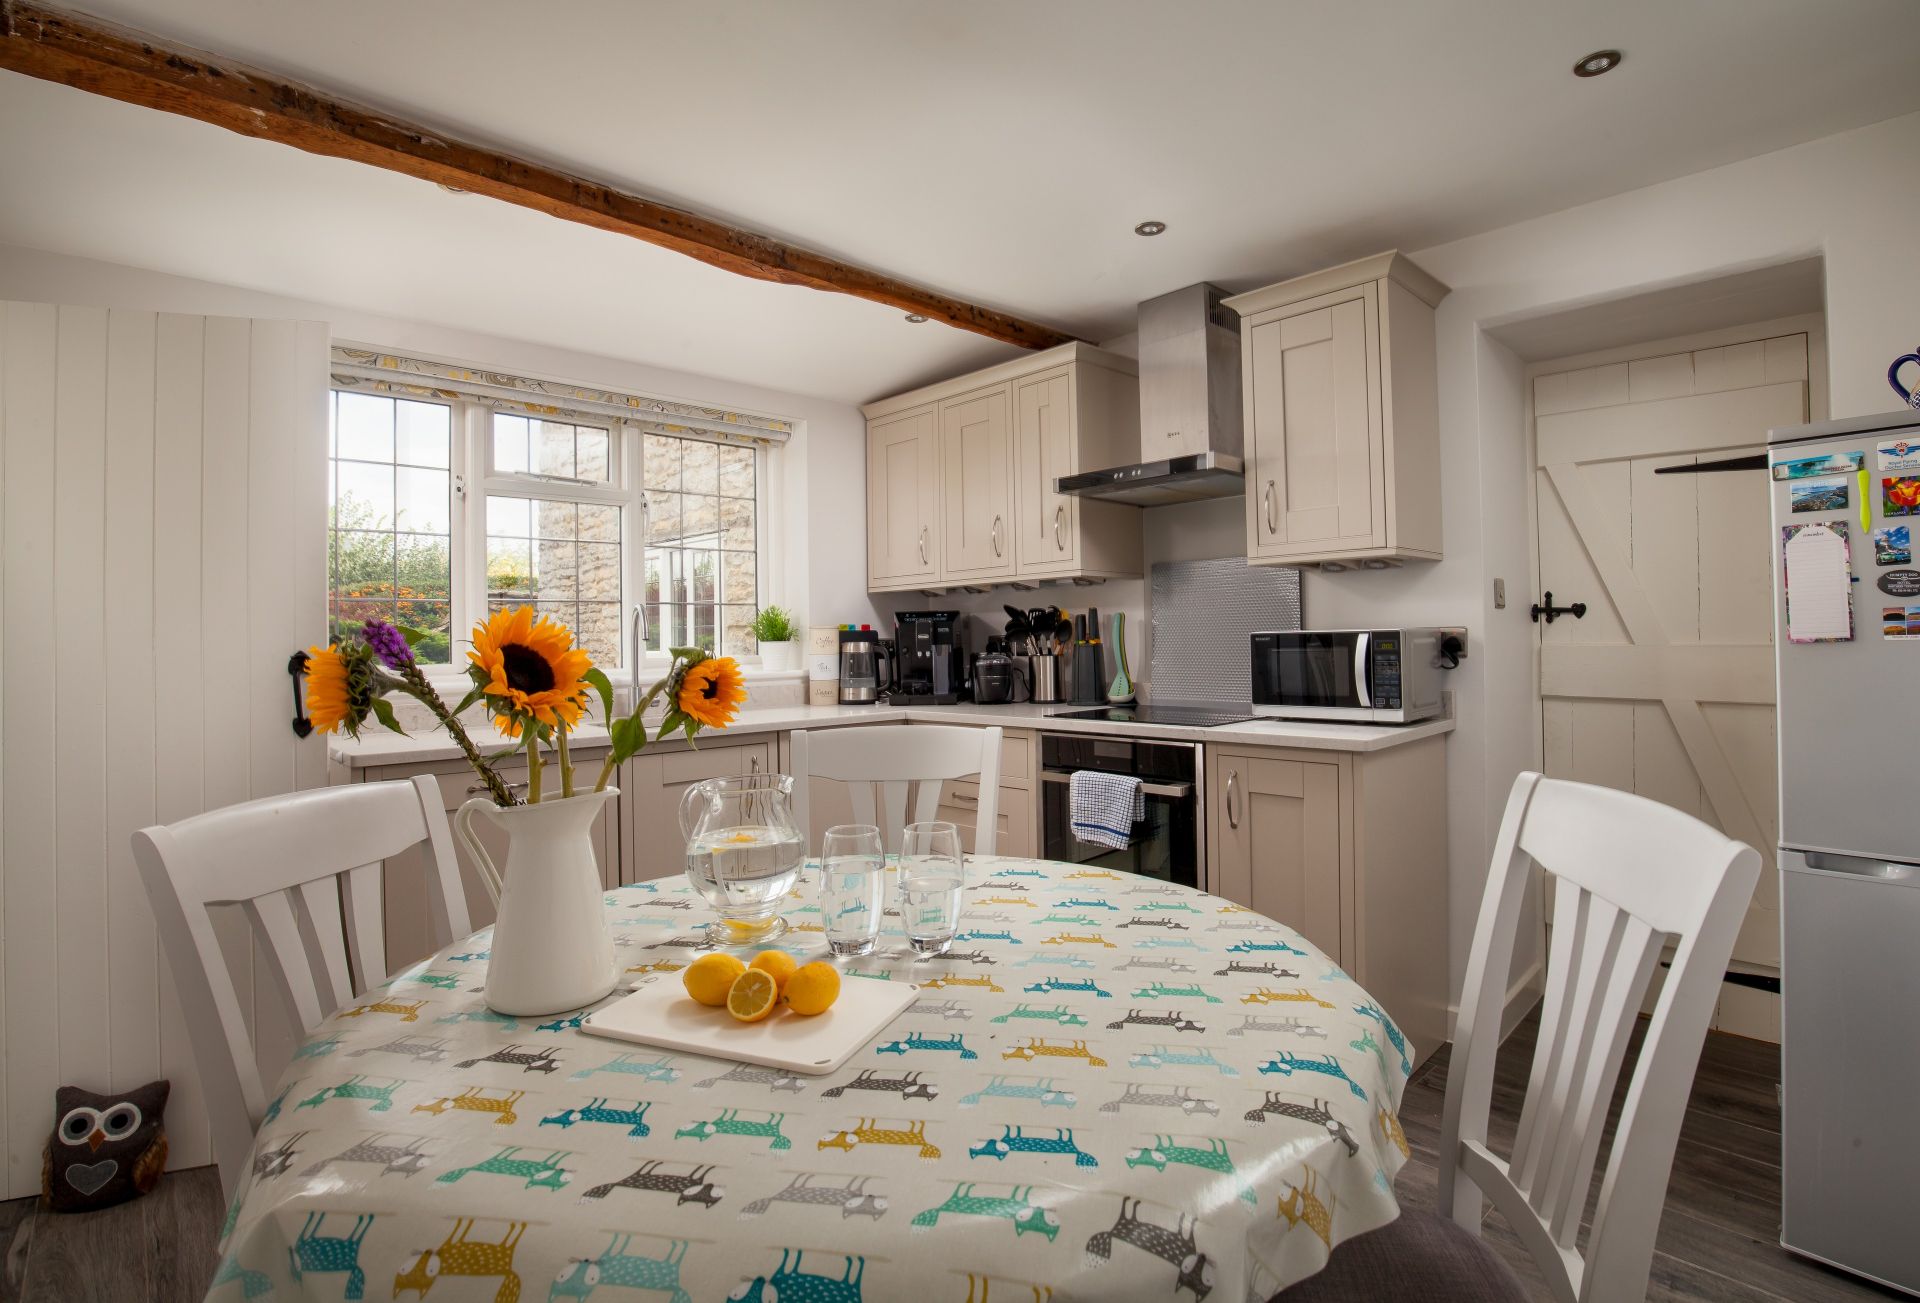 Snowdrop Cottage is located in Sherborne and surrounding villages